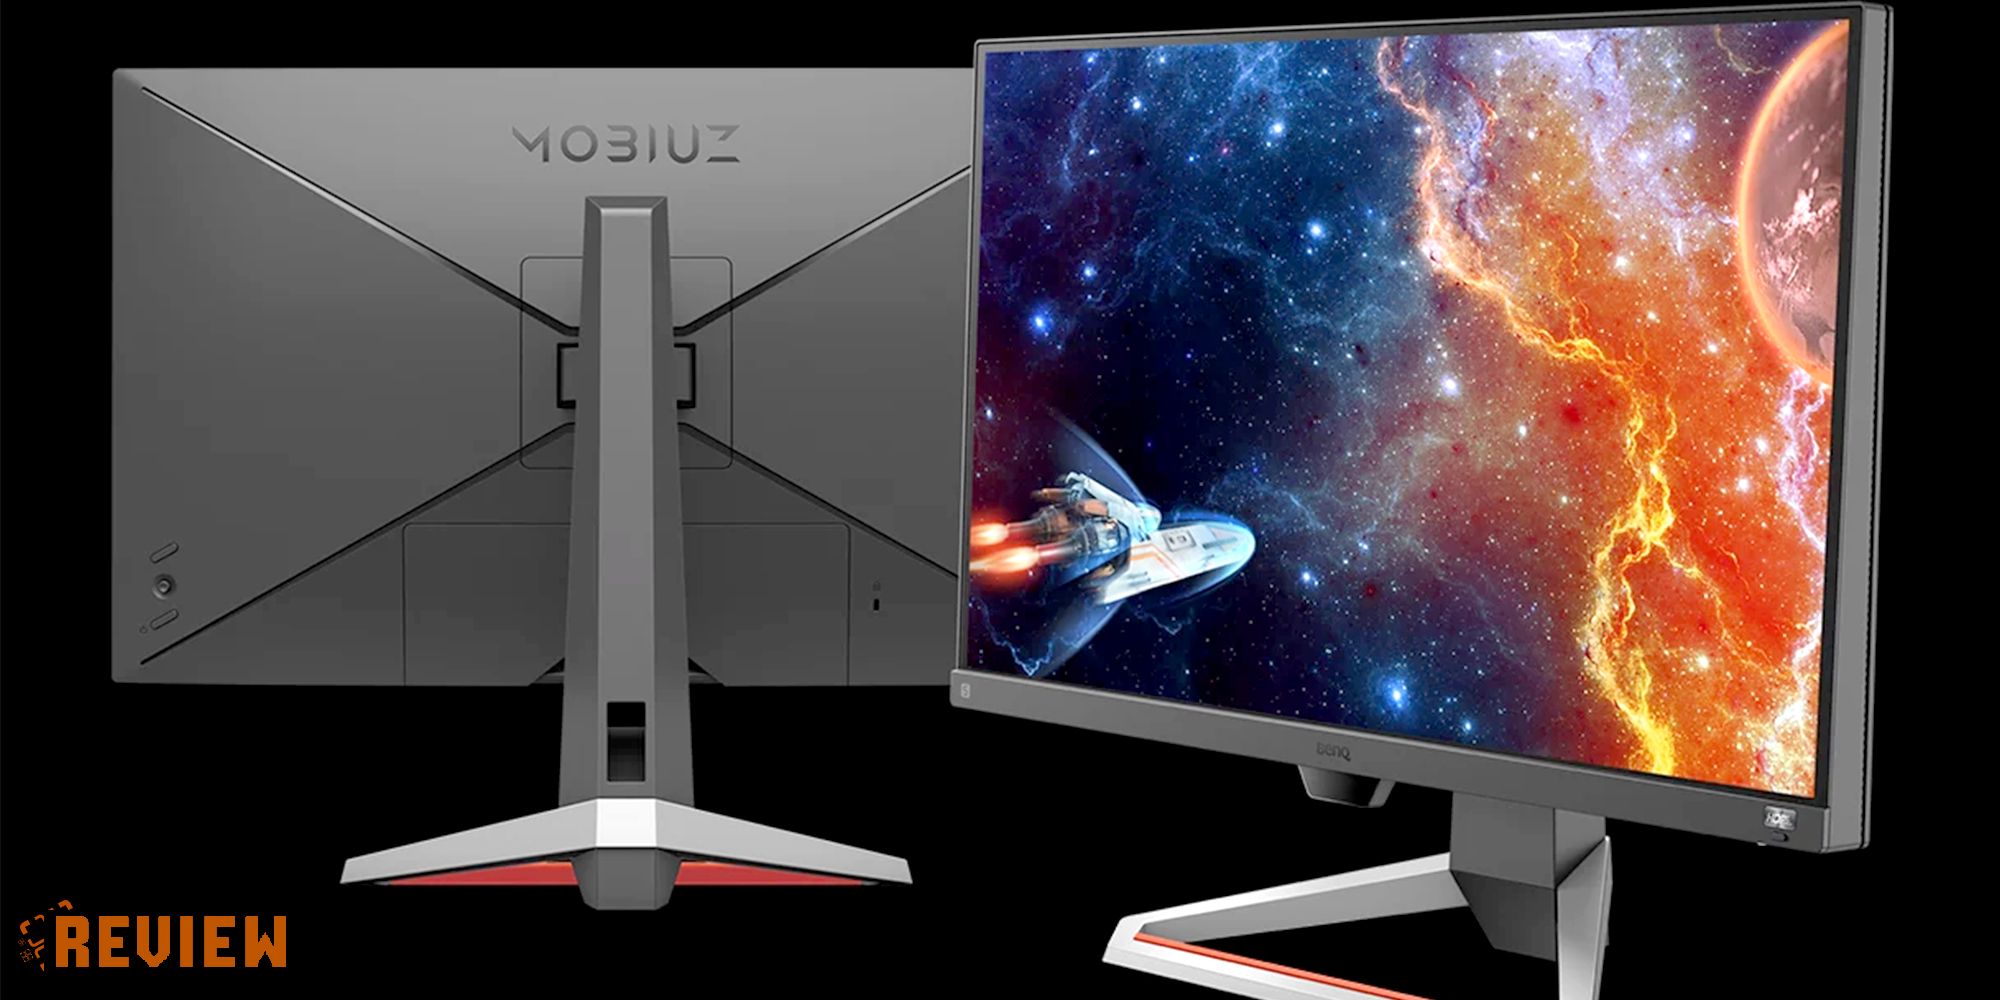 BenQ Mobiuz EX2710 review: An affordable 1080p gaming monitor